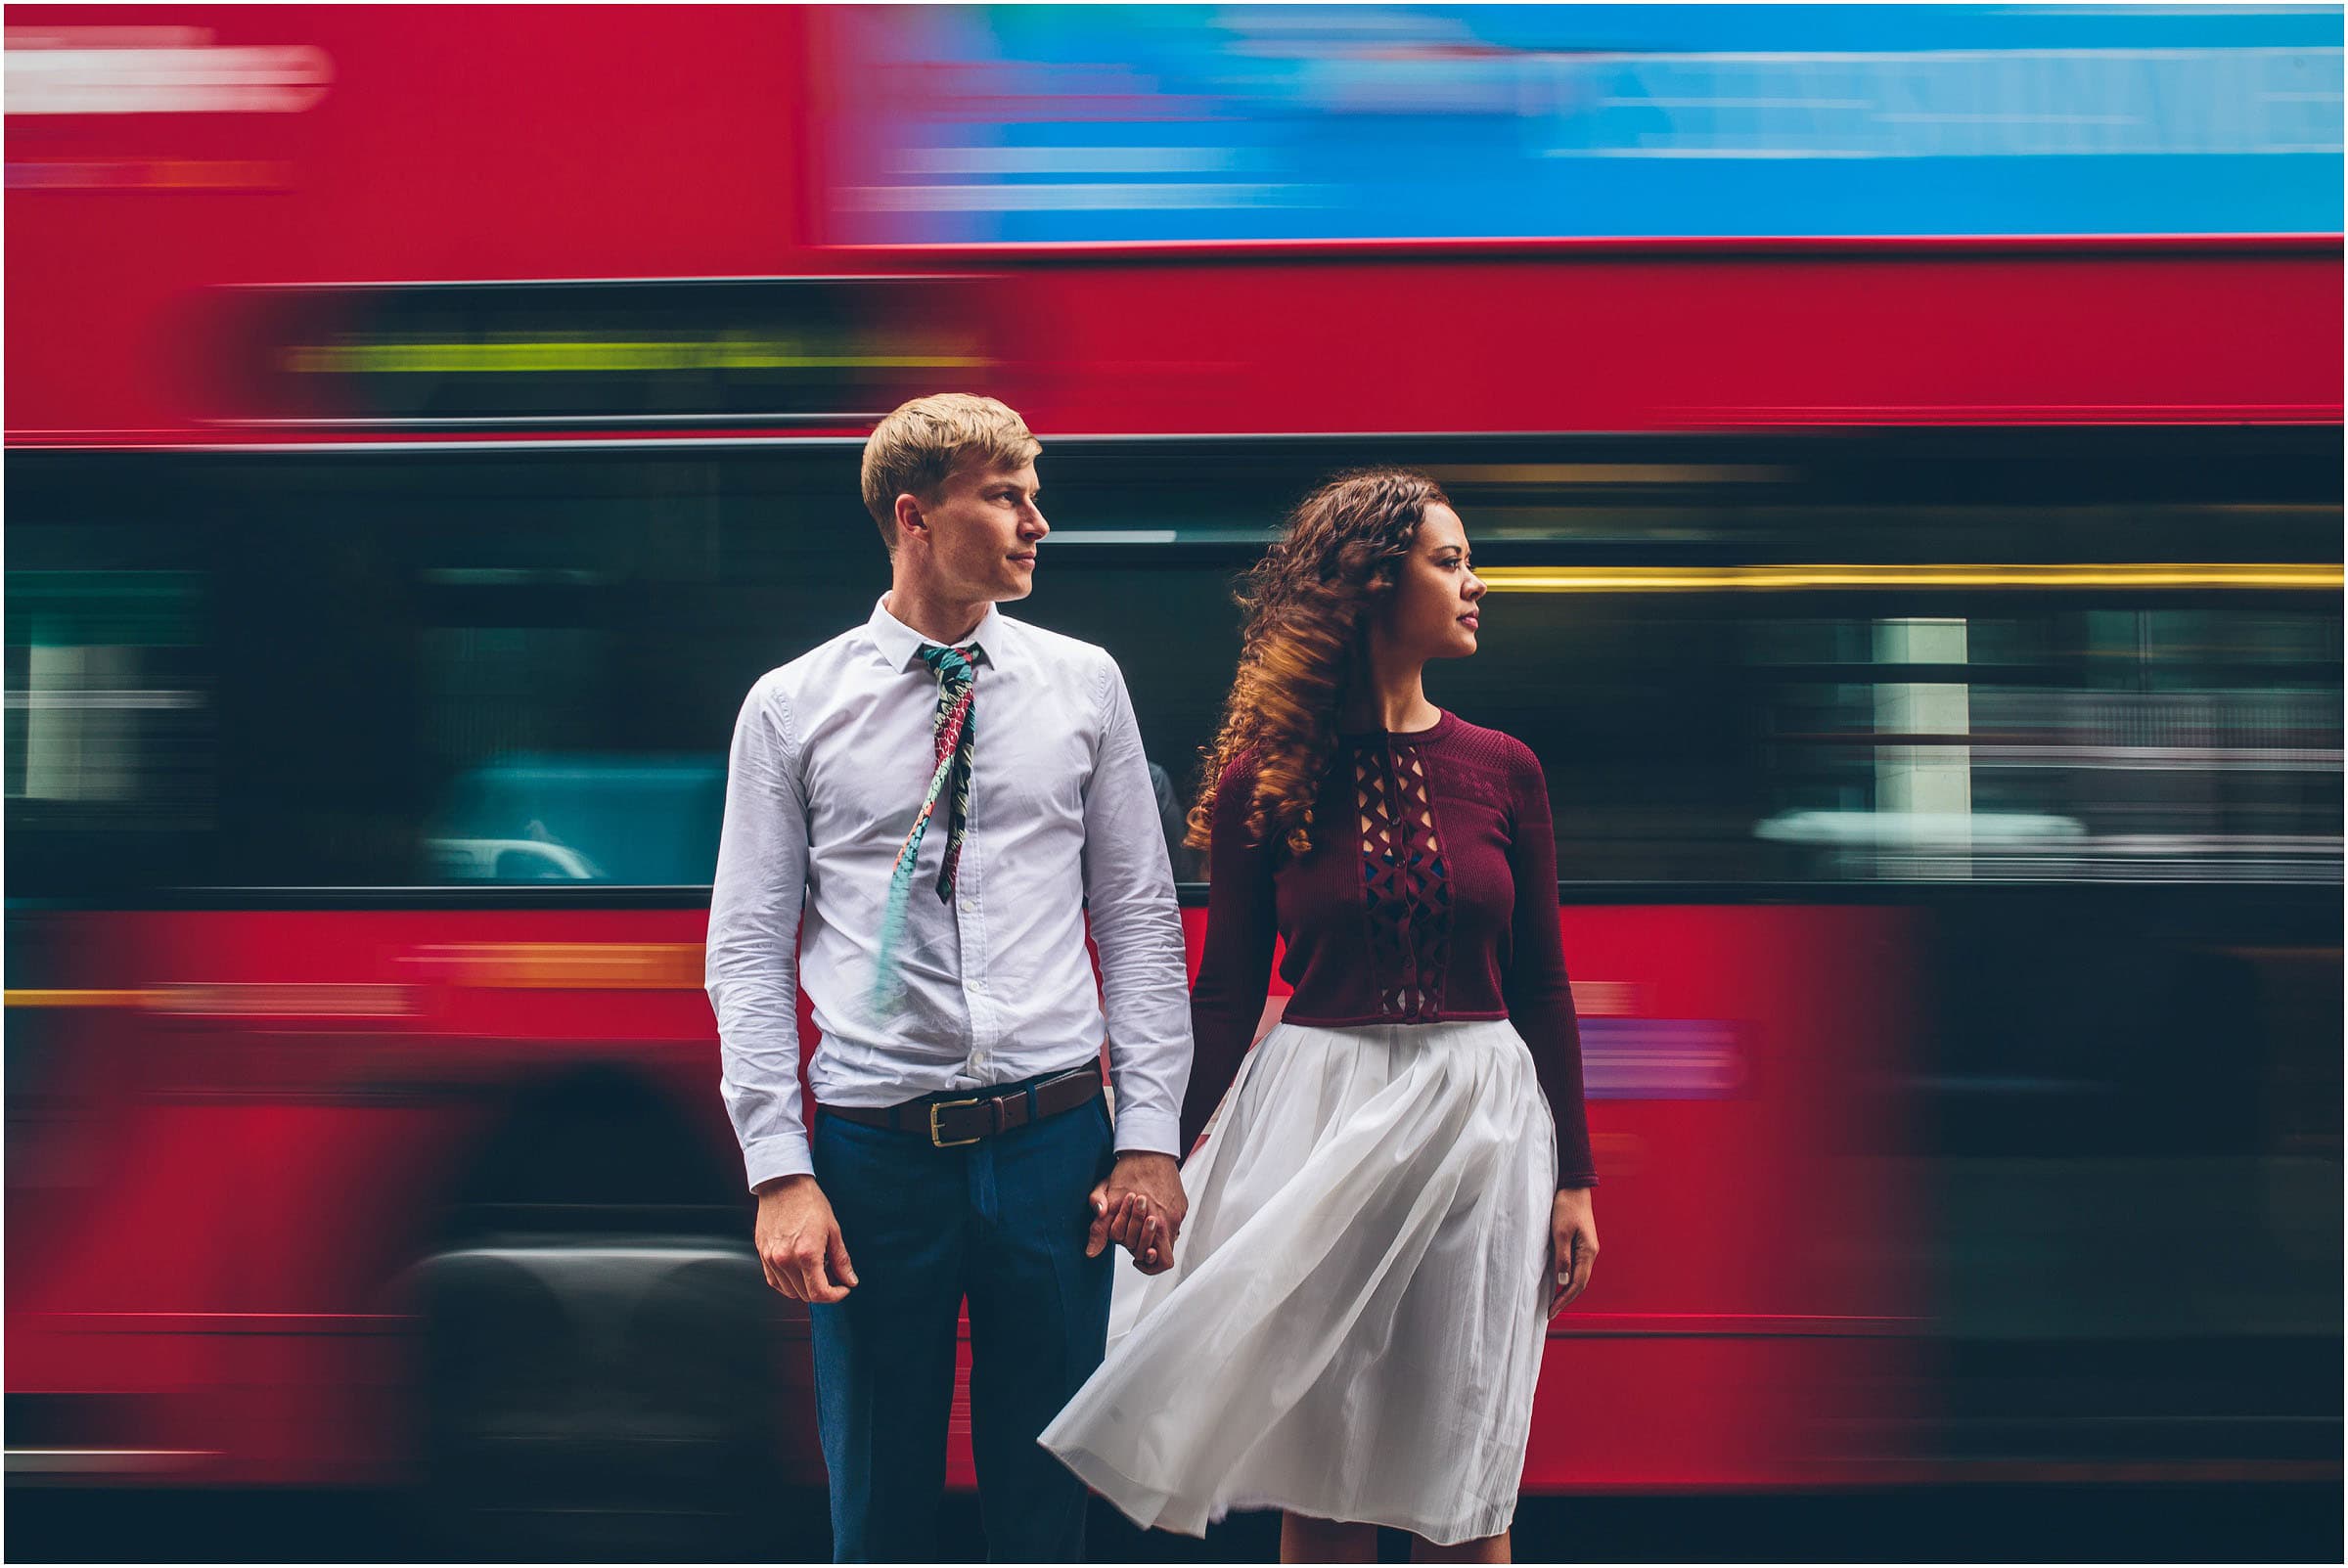 engagement photography in london